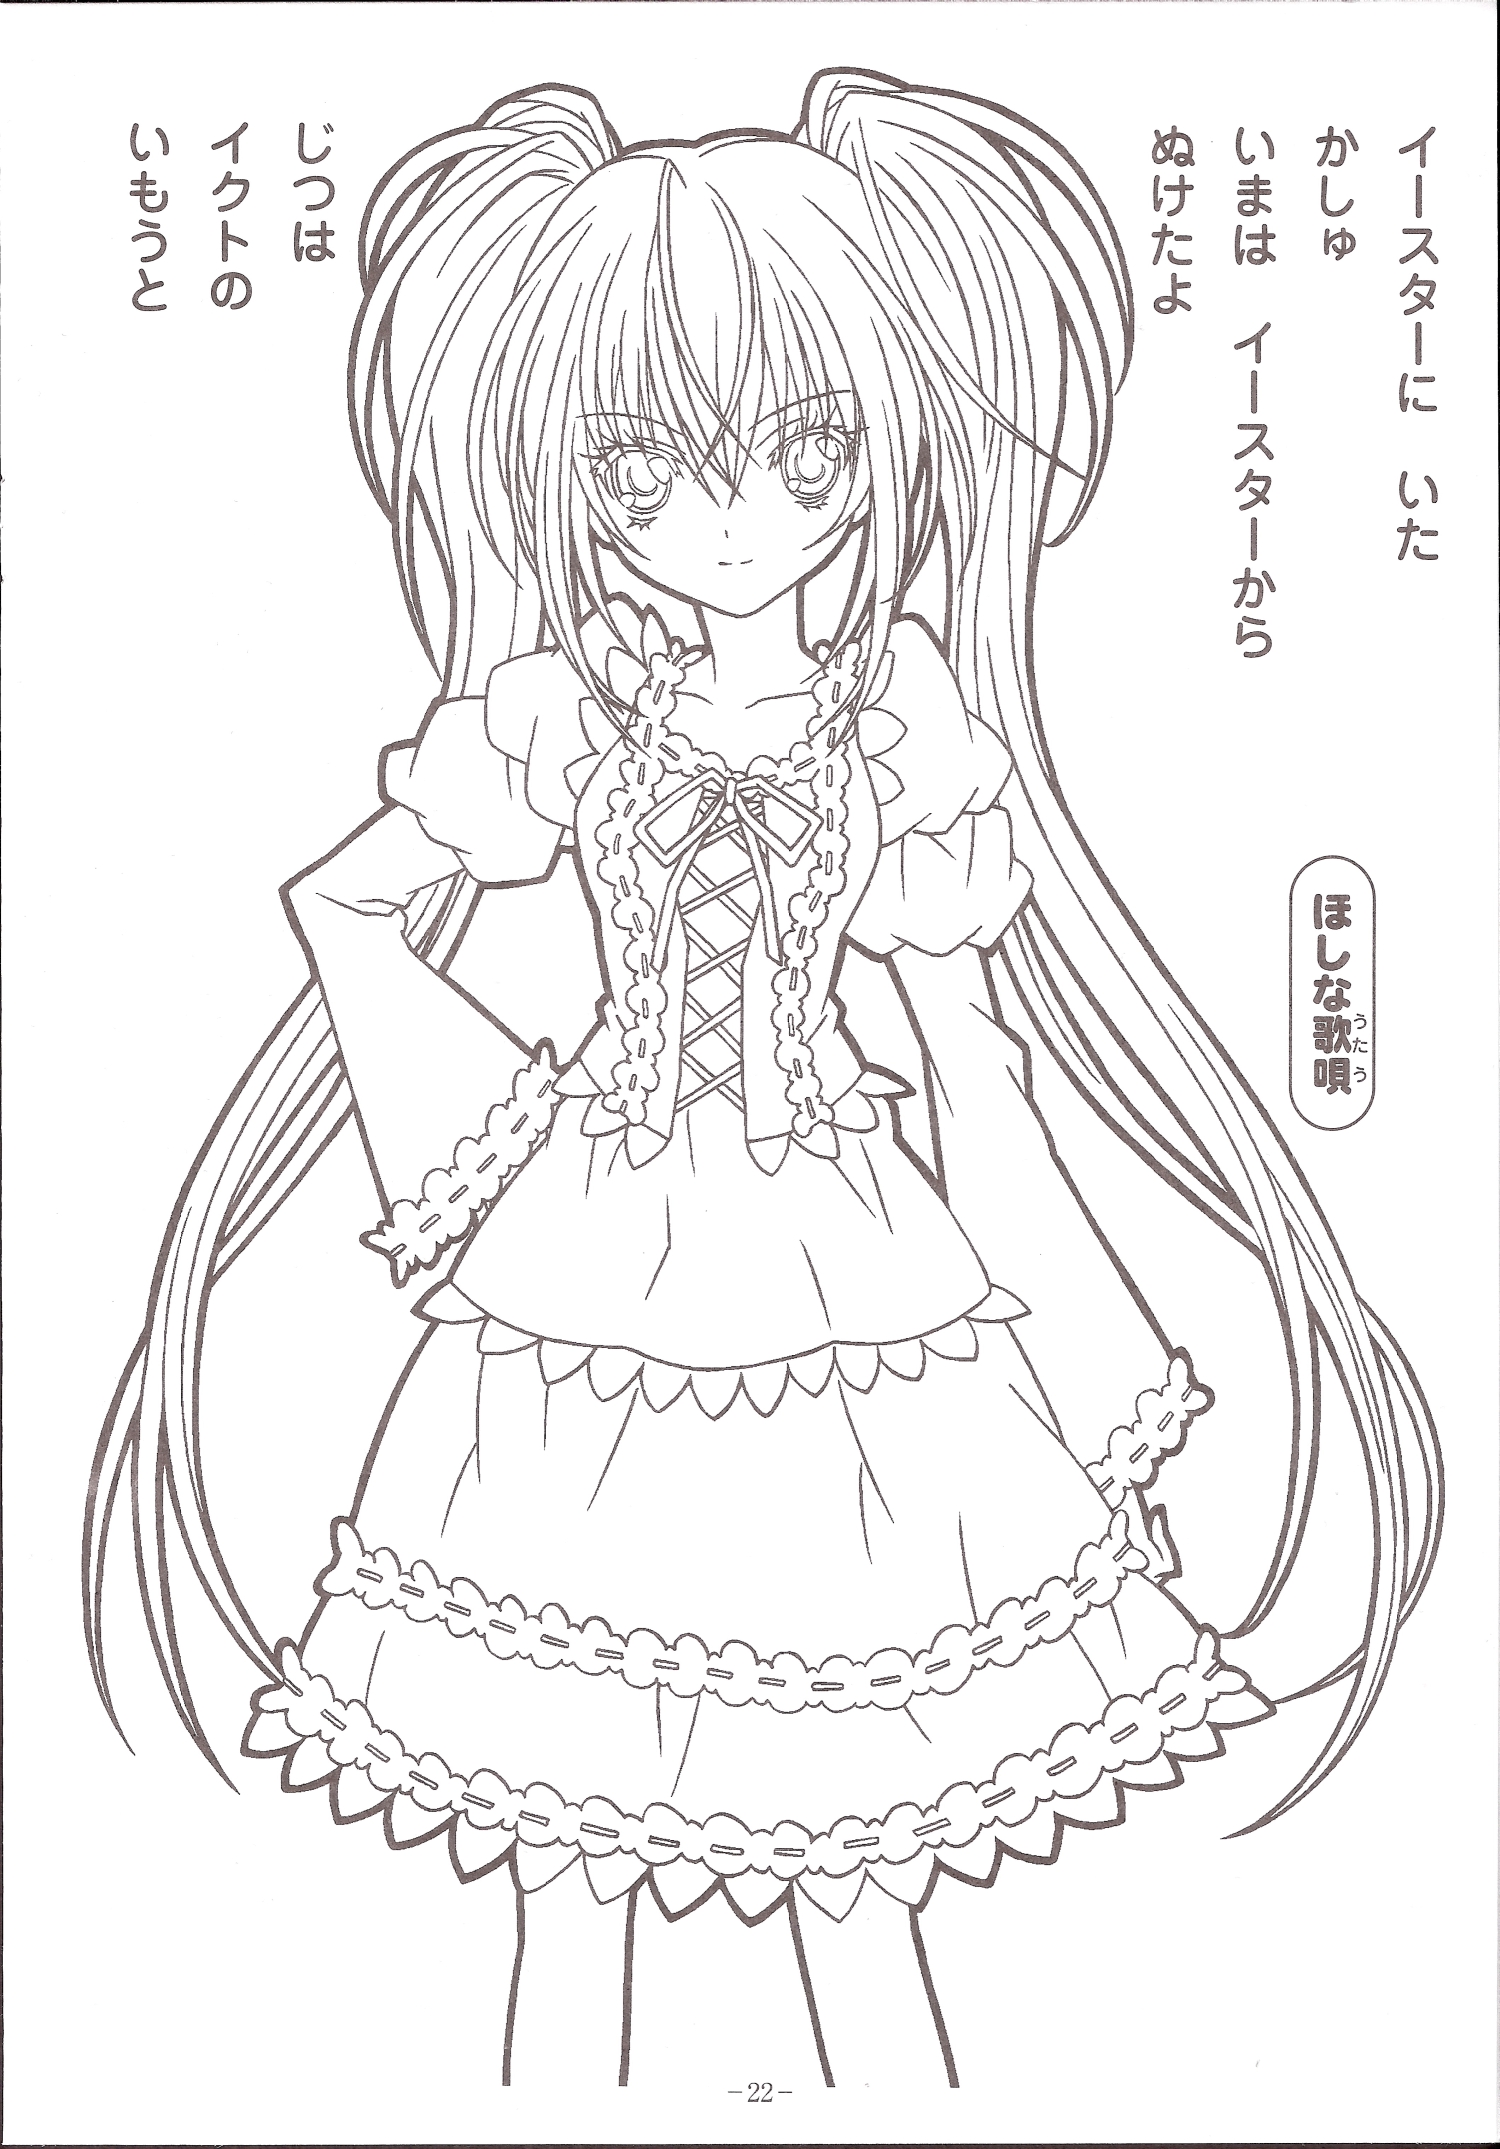 Shugo Chara Coloring Pages 28 Images Immagini Da Colorare Undertale